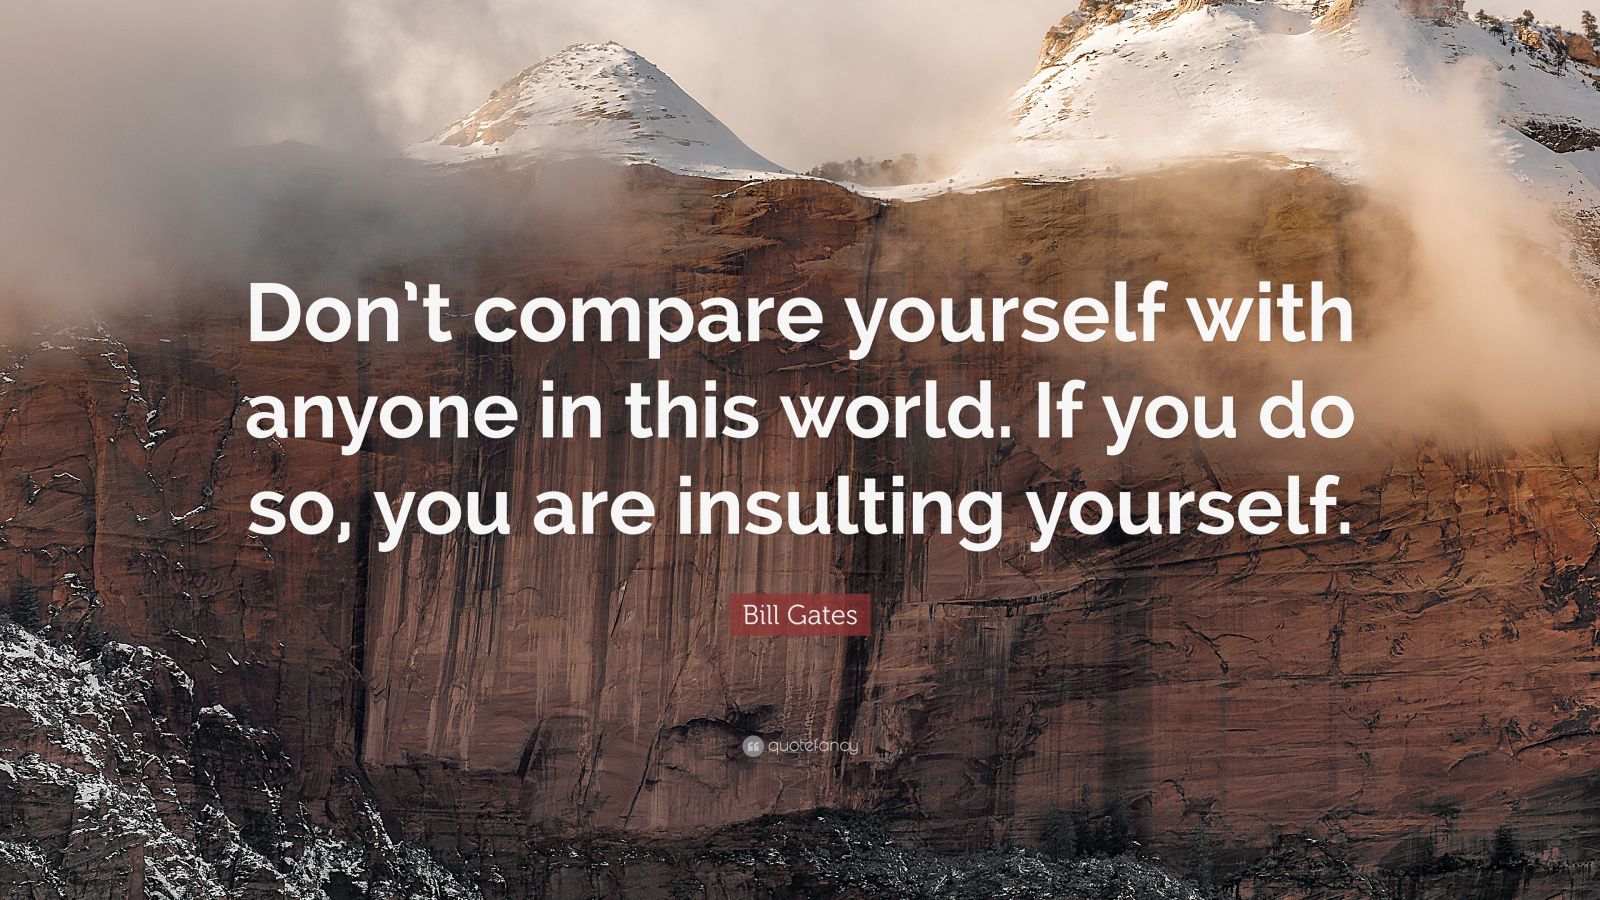 Bill Gates Quote: “Don’t compare yourself with anyone in this world. If